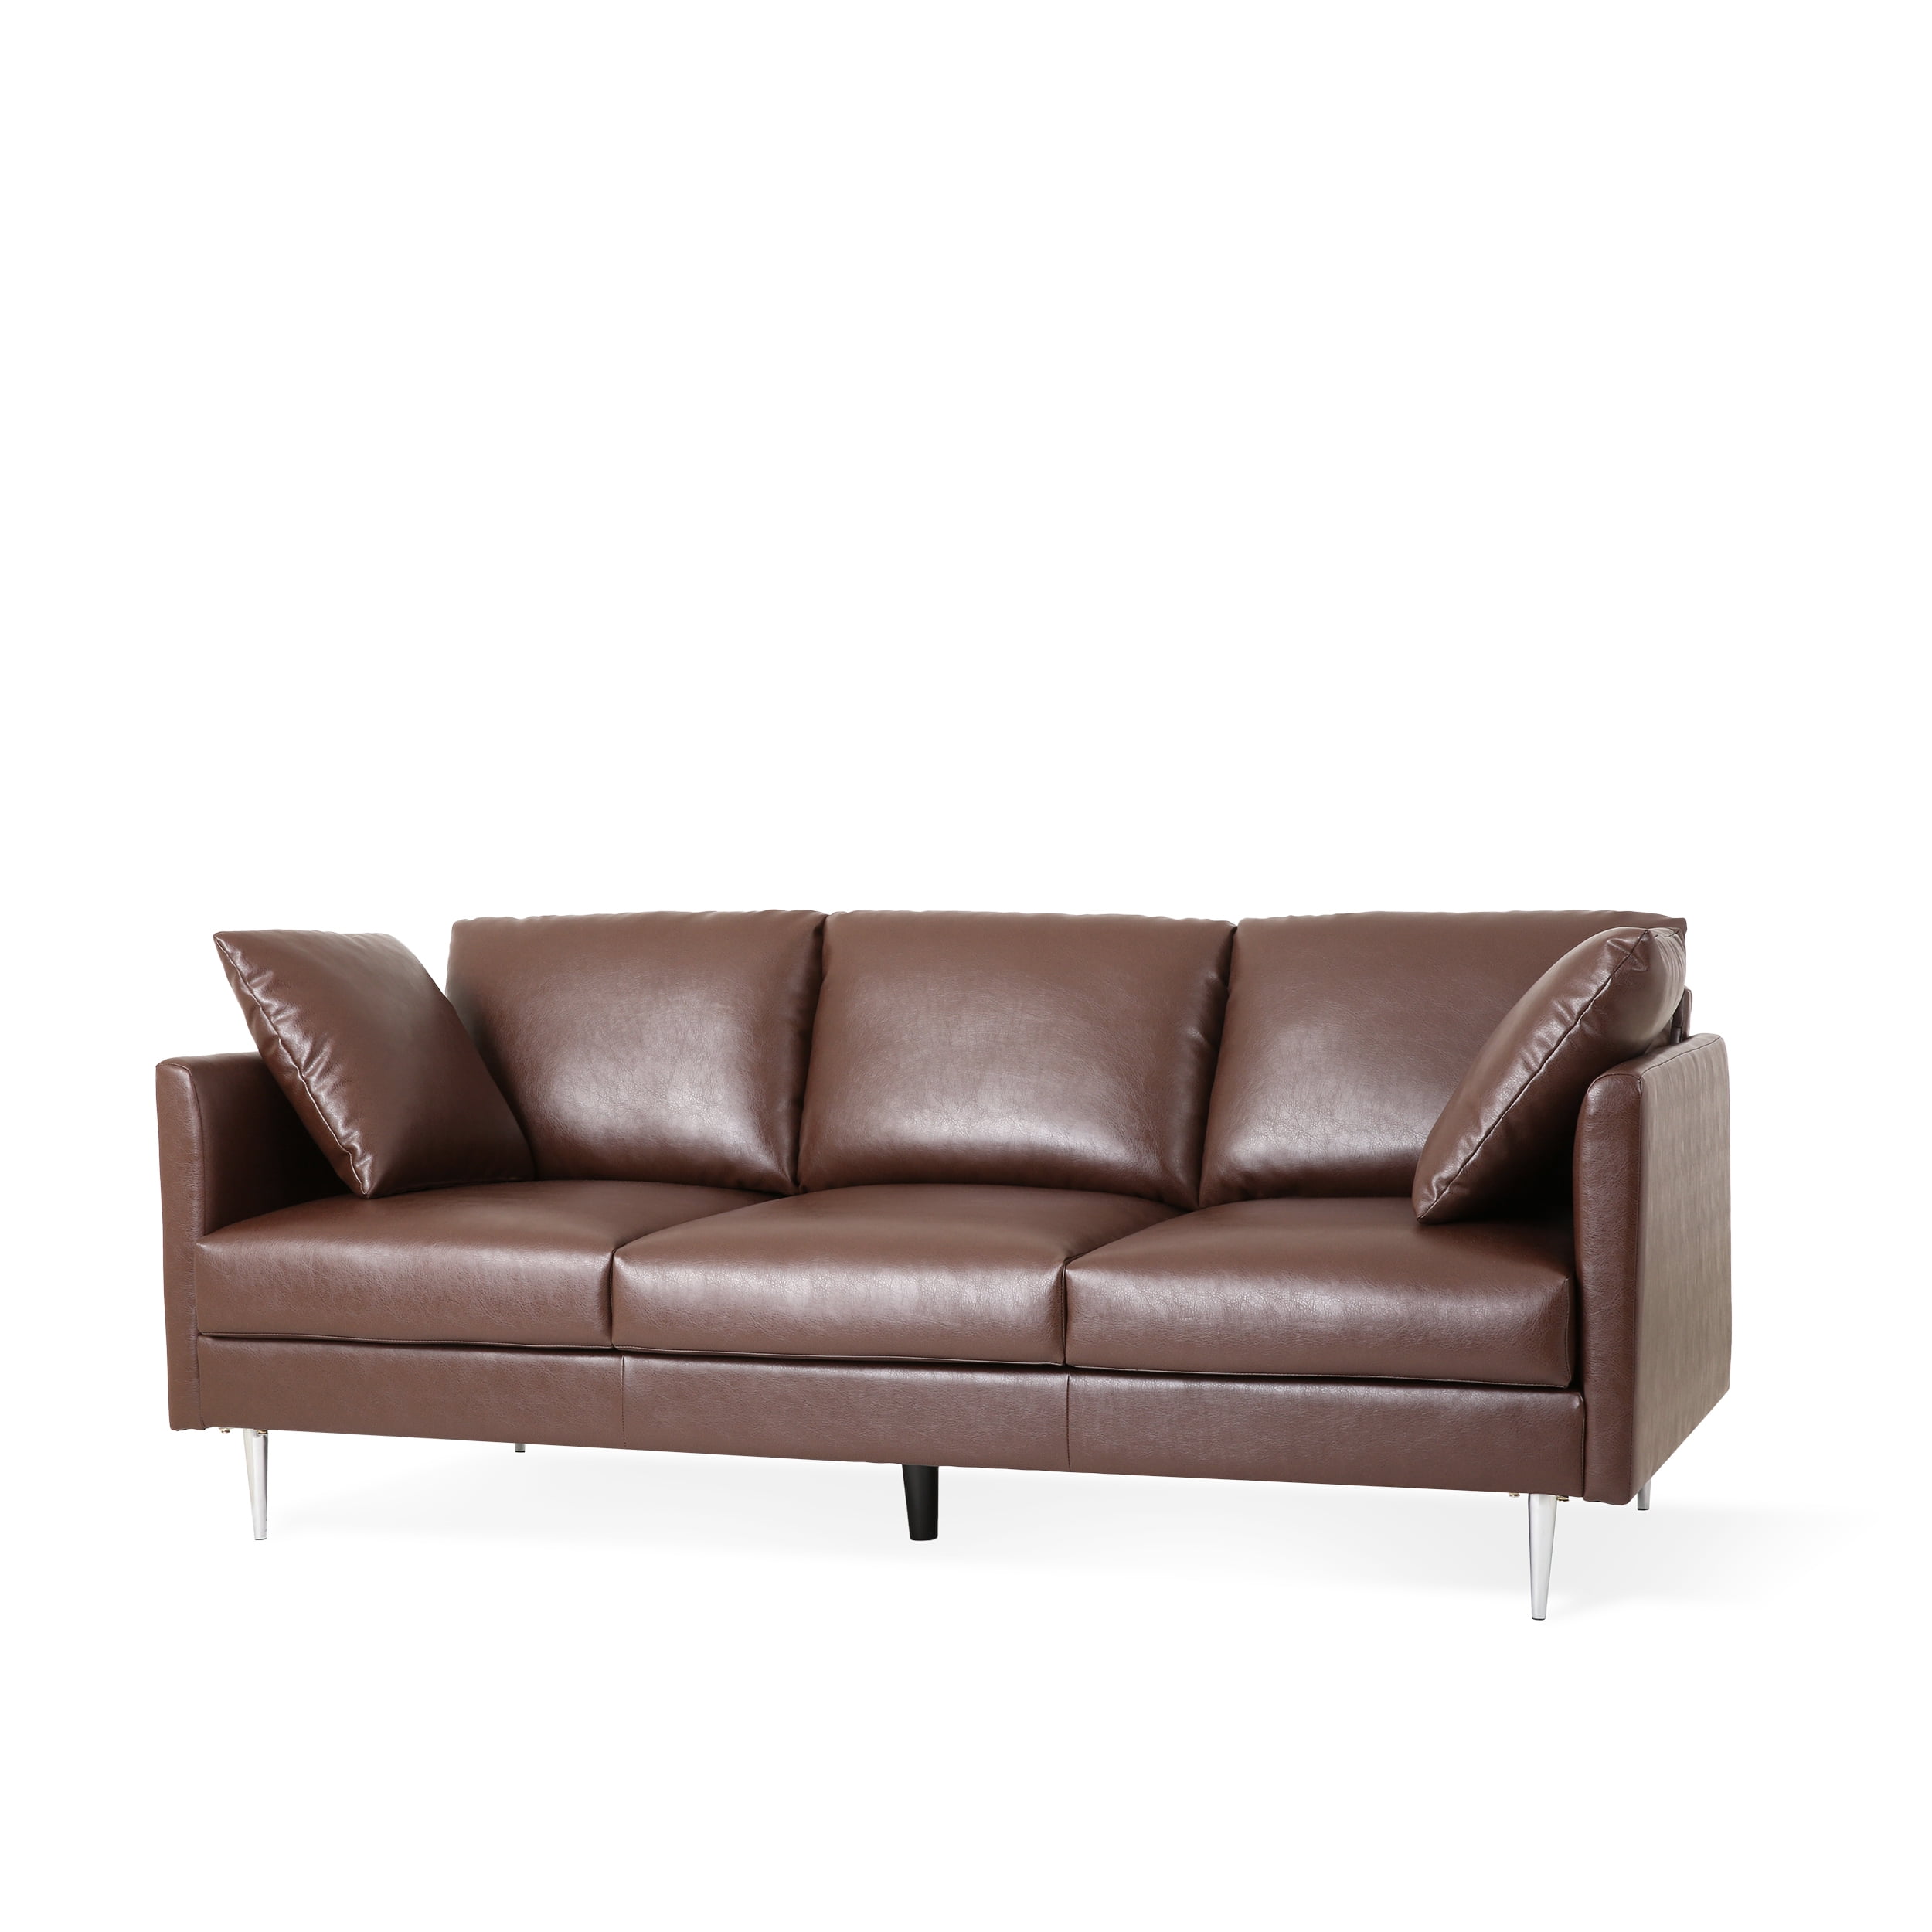 2-Seater Tufted PU Leather Double Sofa Brown HOMCOM 51 Wide Loveseat with Armrest 